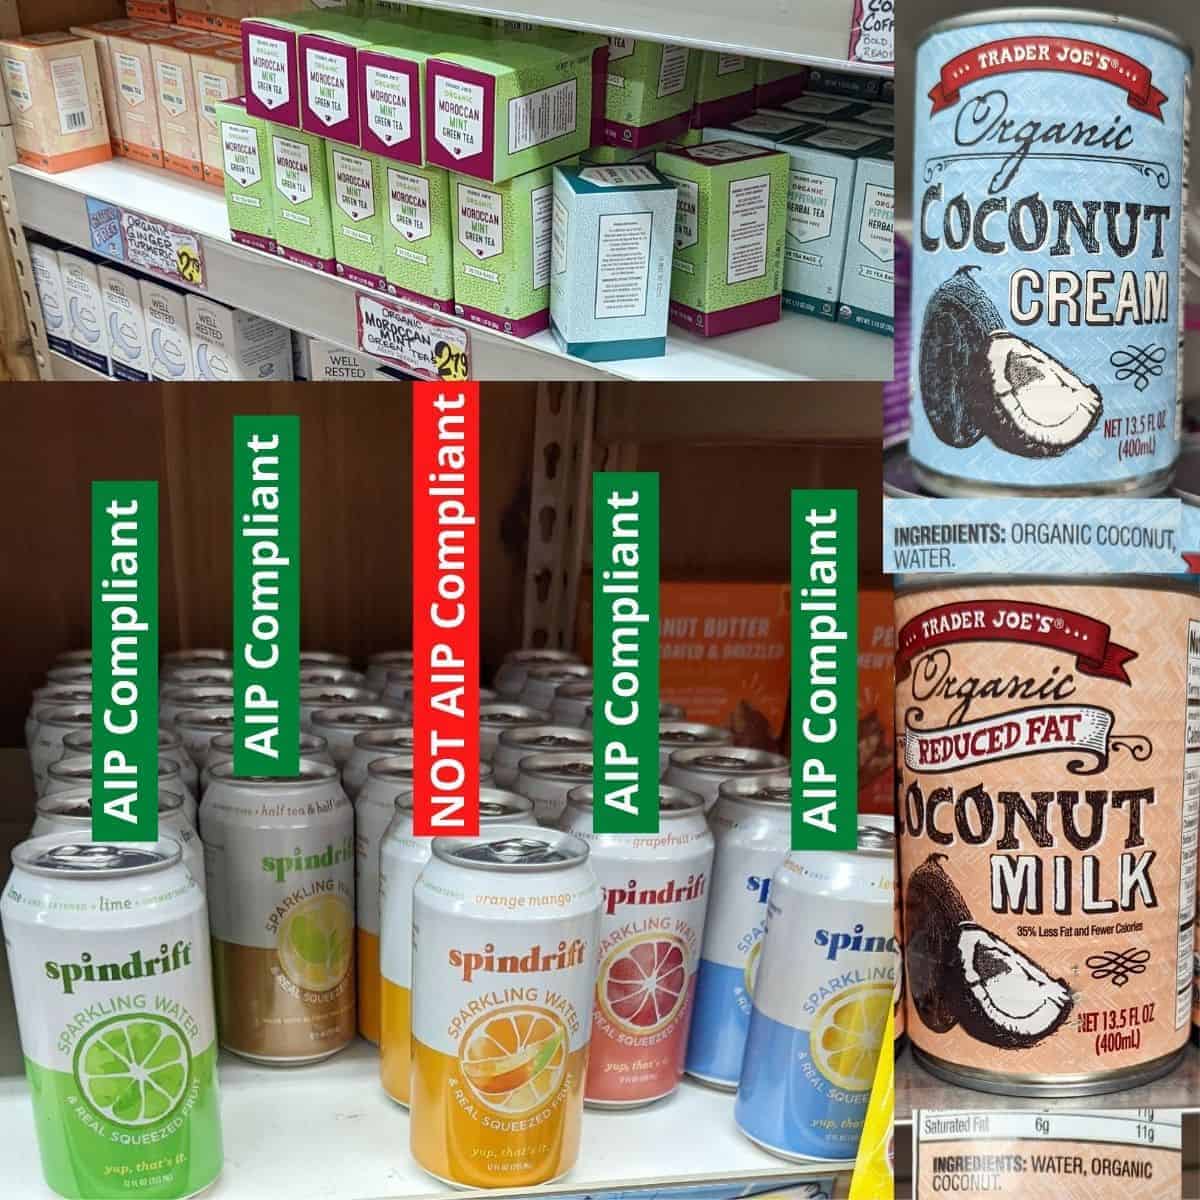 Spindrift, trader joes tea, coconut cream, and coconut milk with ingredient labels